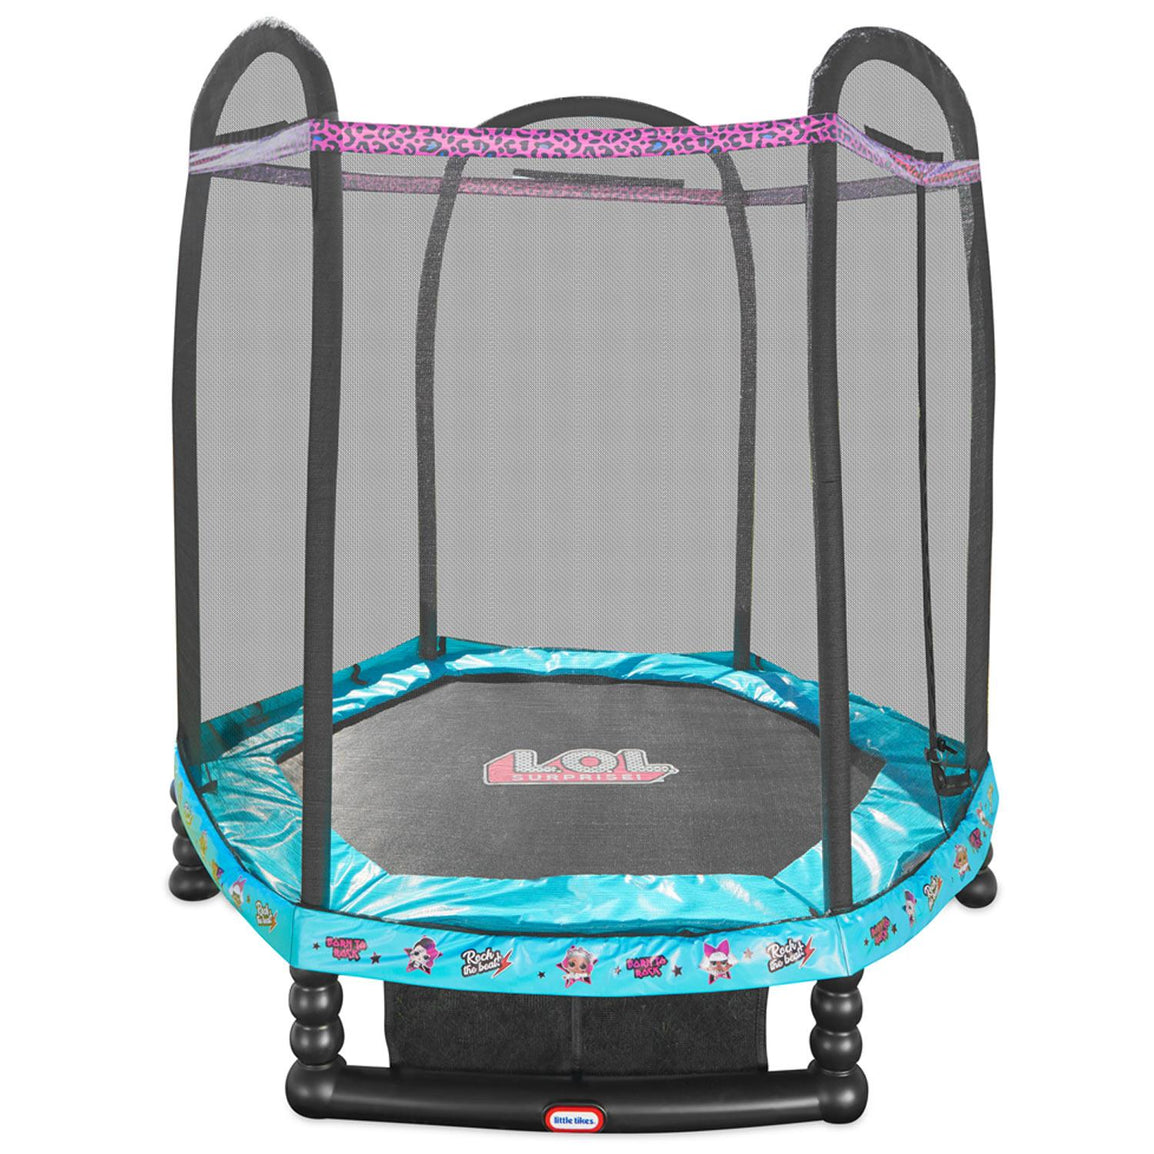 Provides hours of active bouncer trampoline fun